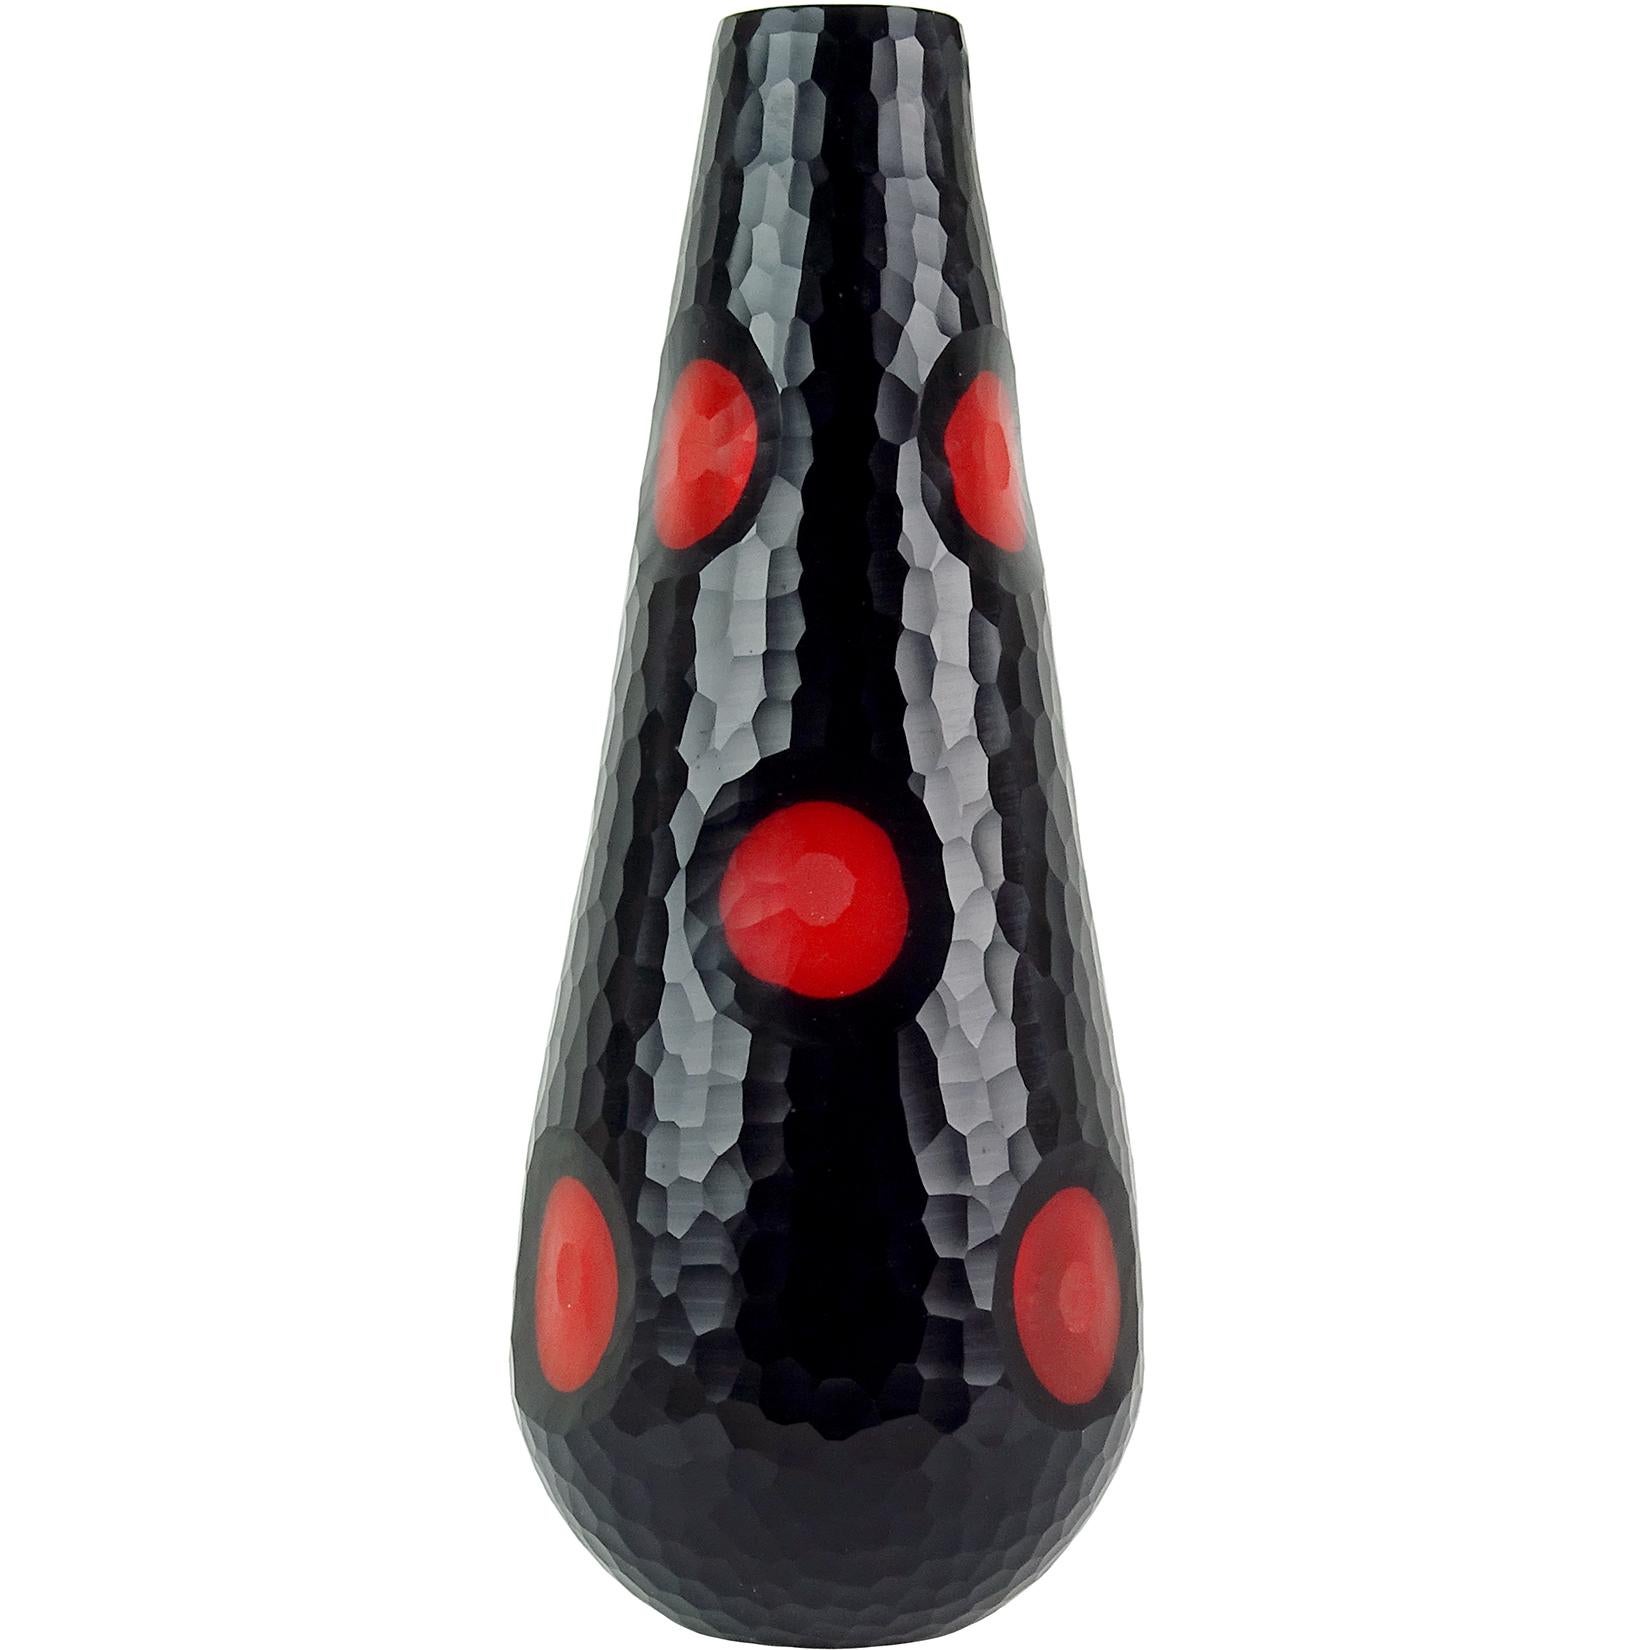 Murano Modern Carved Black over Red Italian Art Glass Sculptural Flower Vase In Good Condition For Sale In Kissimmee, FL